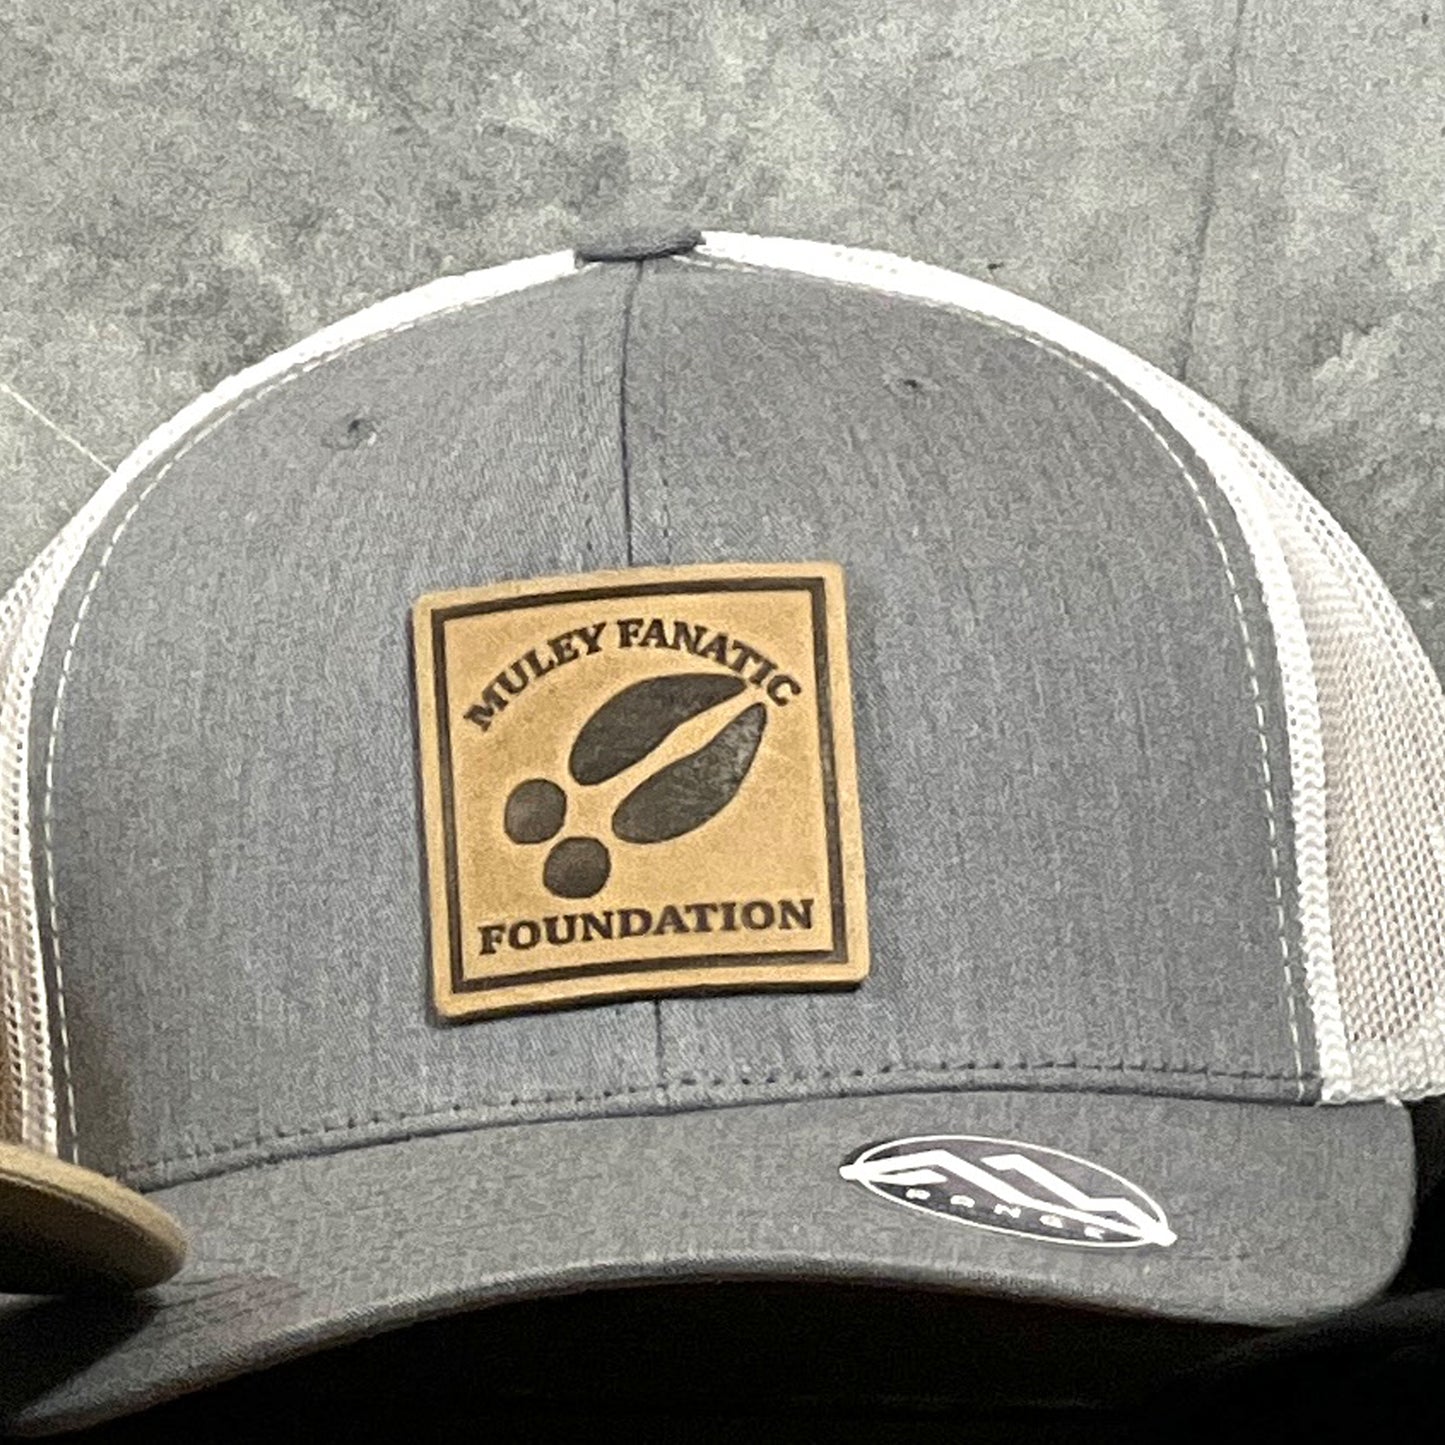 MFF Leather Patch Hat